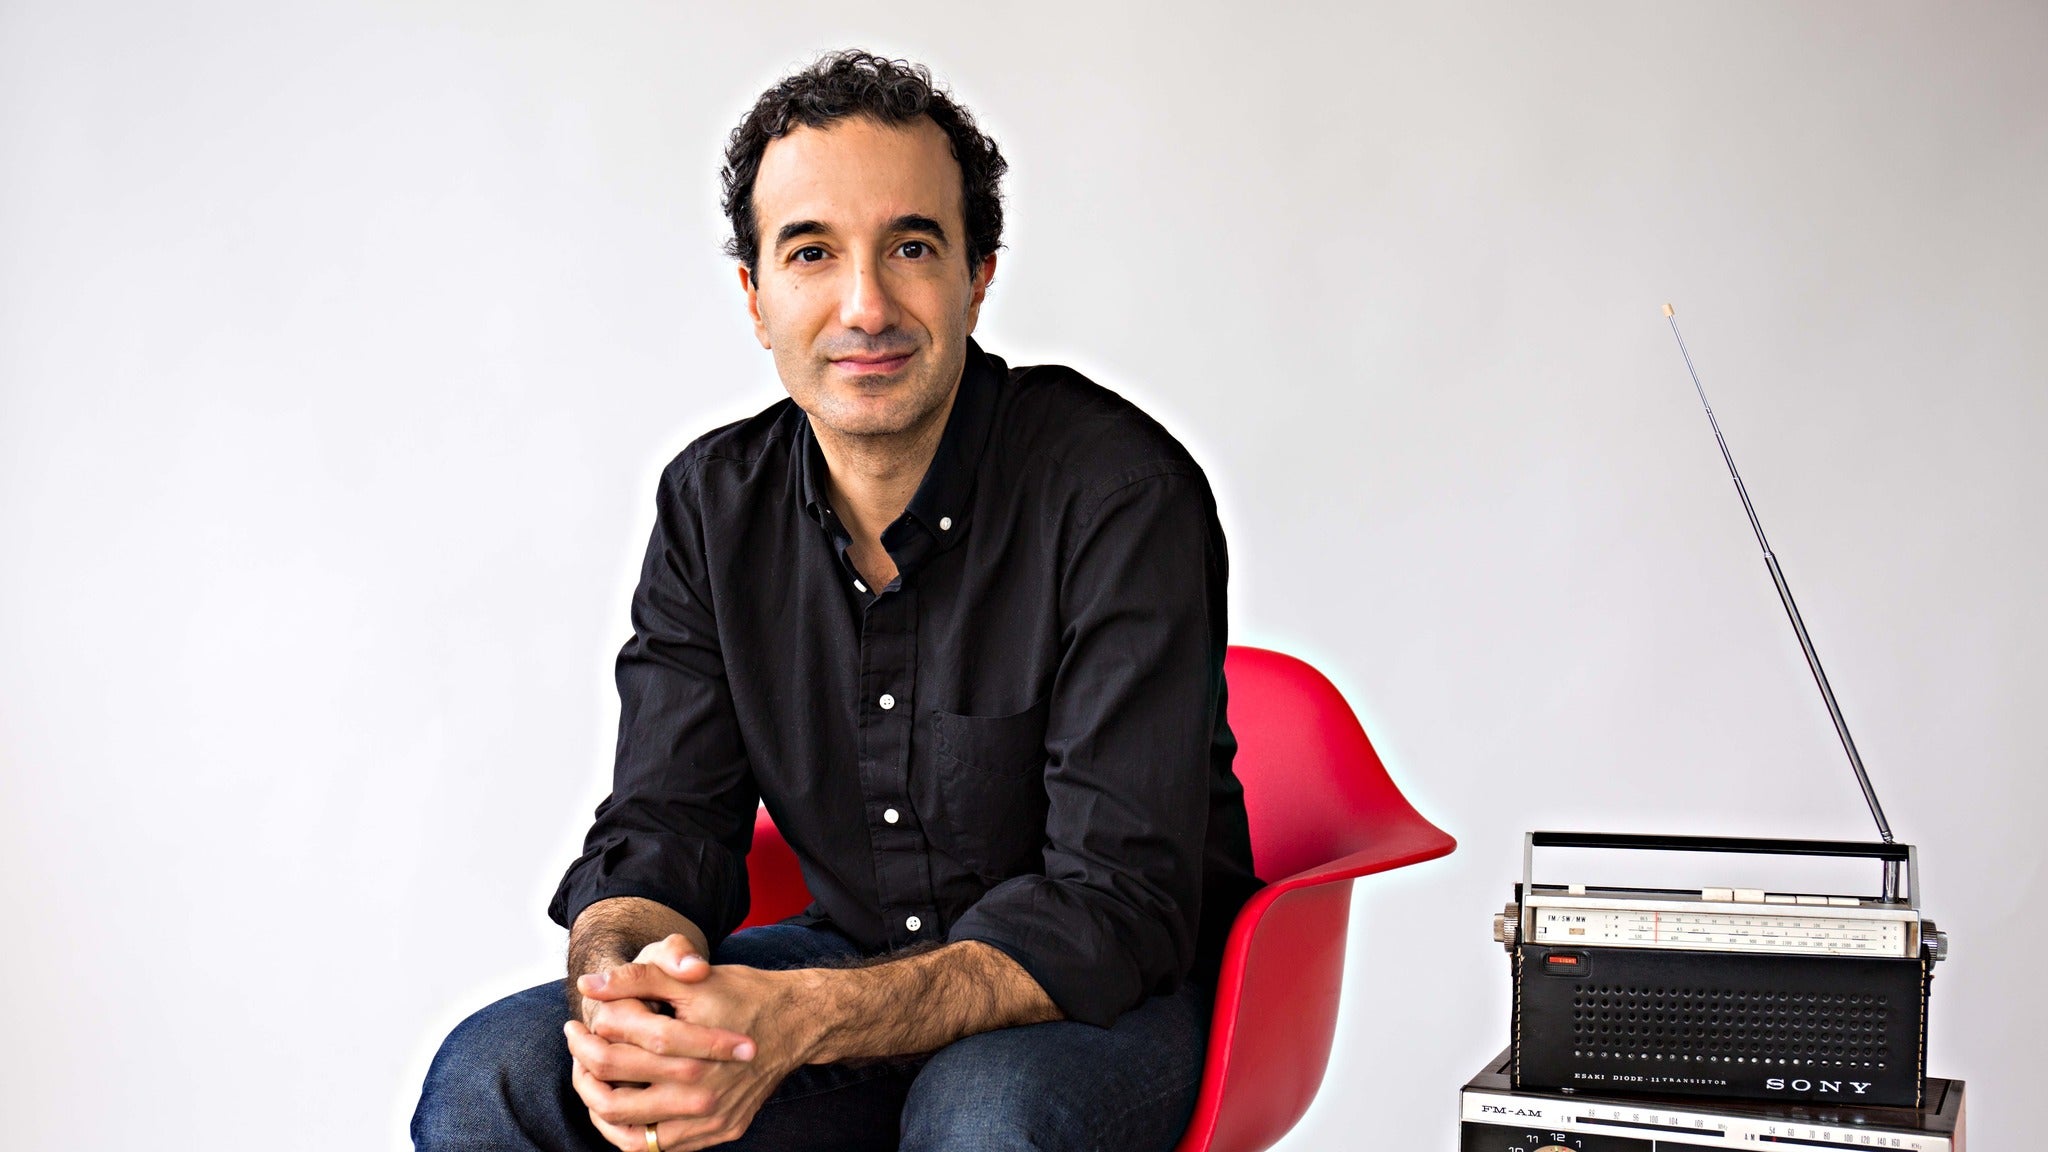 Jad Abumrad in Seattle event information